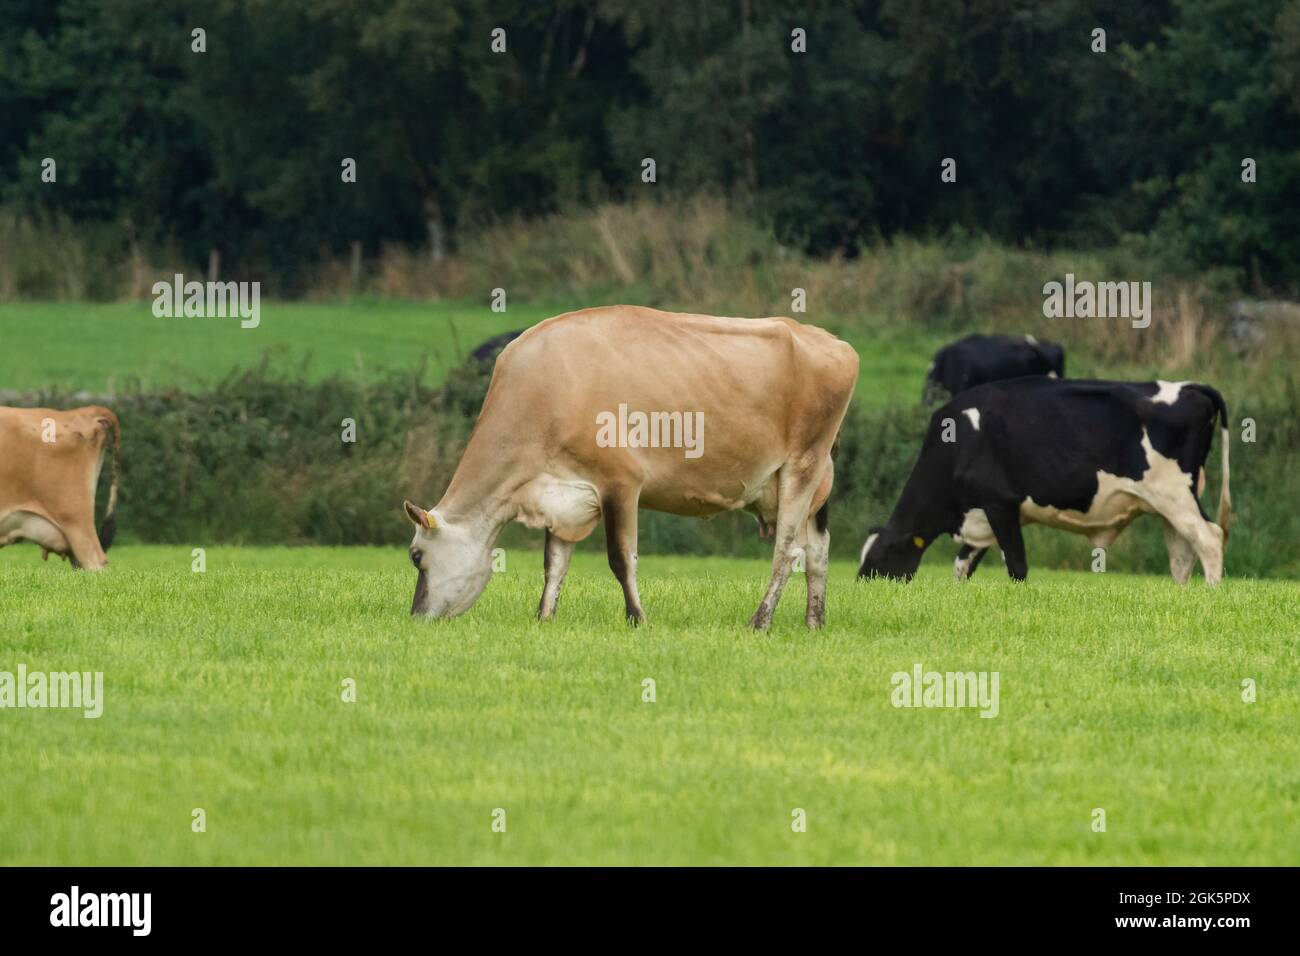 A Jersey cow in a grazing field along with Holstein Friesian cows. The cow is wearing a collar for identification. Stock Photo